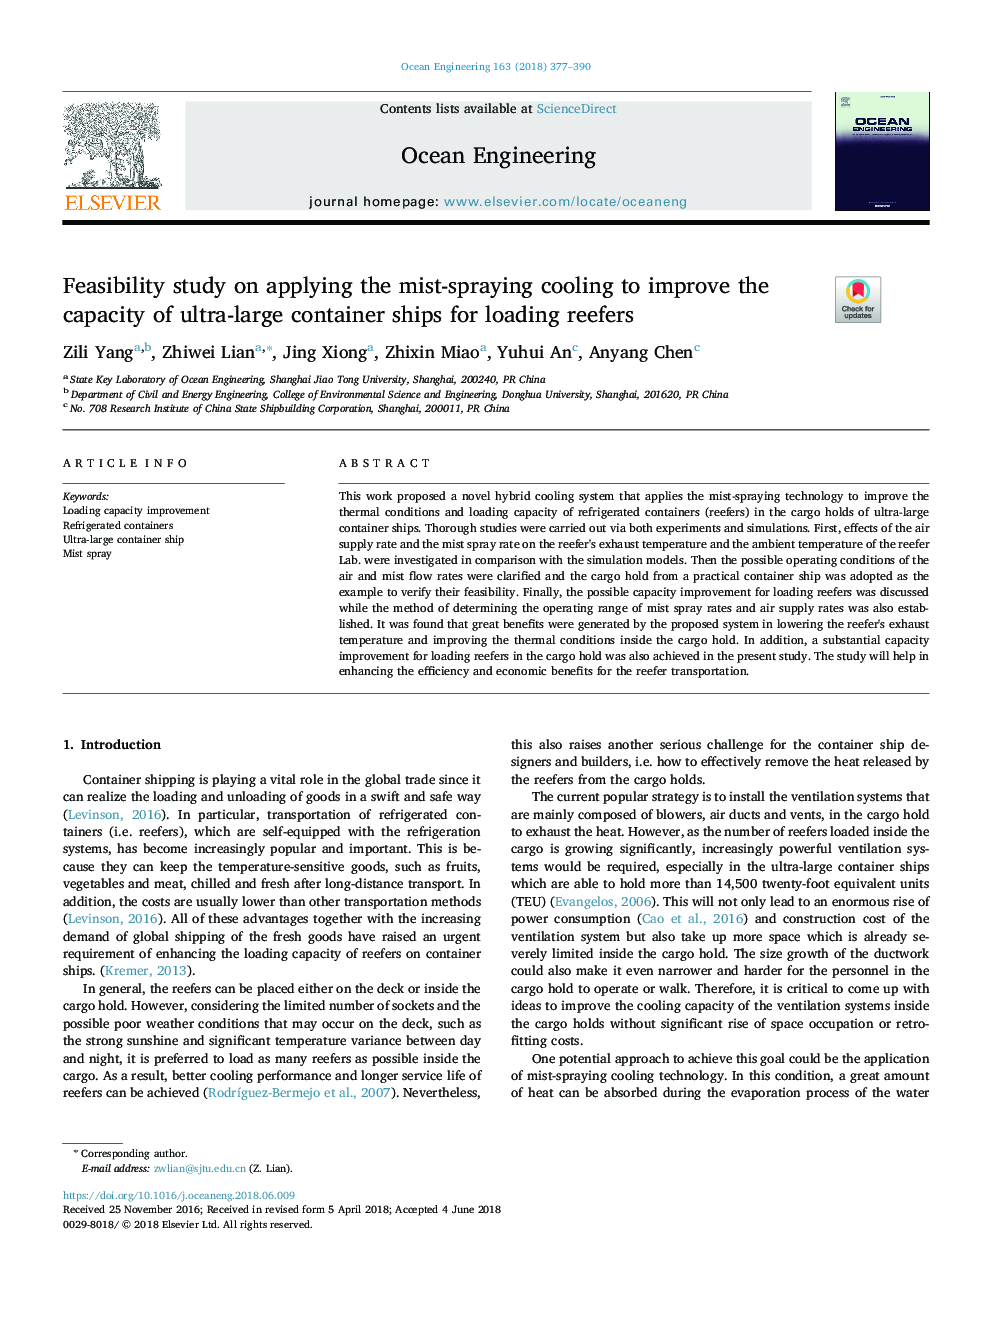 Feasibility study on applying the mist-spraying cooling to improve the capacity of ultra-large container ships for loading reefers